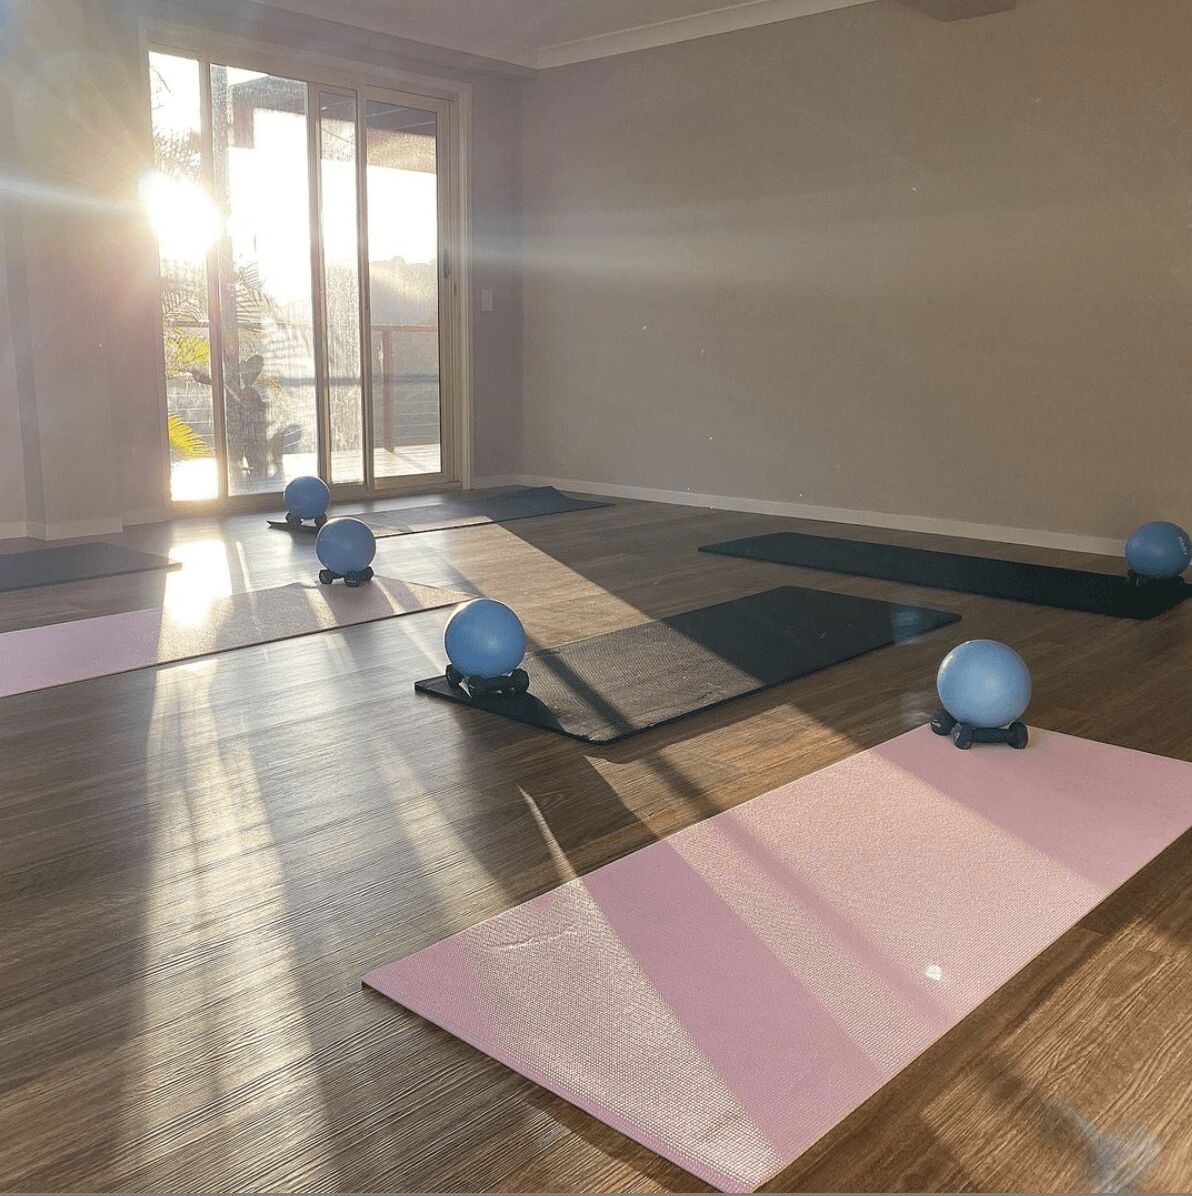 A comfortable sunny room with pilates mats and props at Valley Pilates studio.